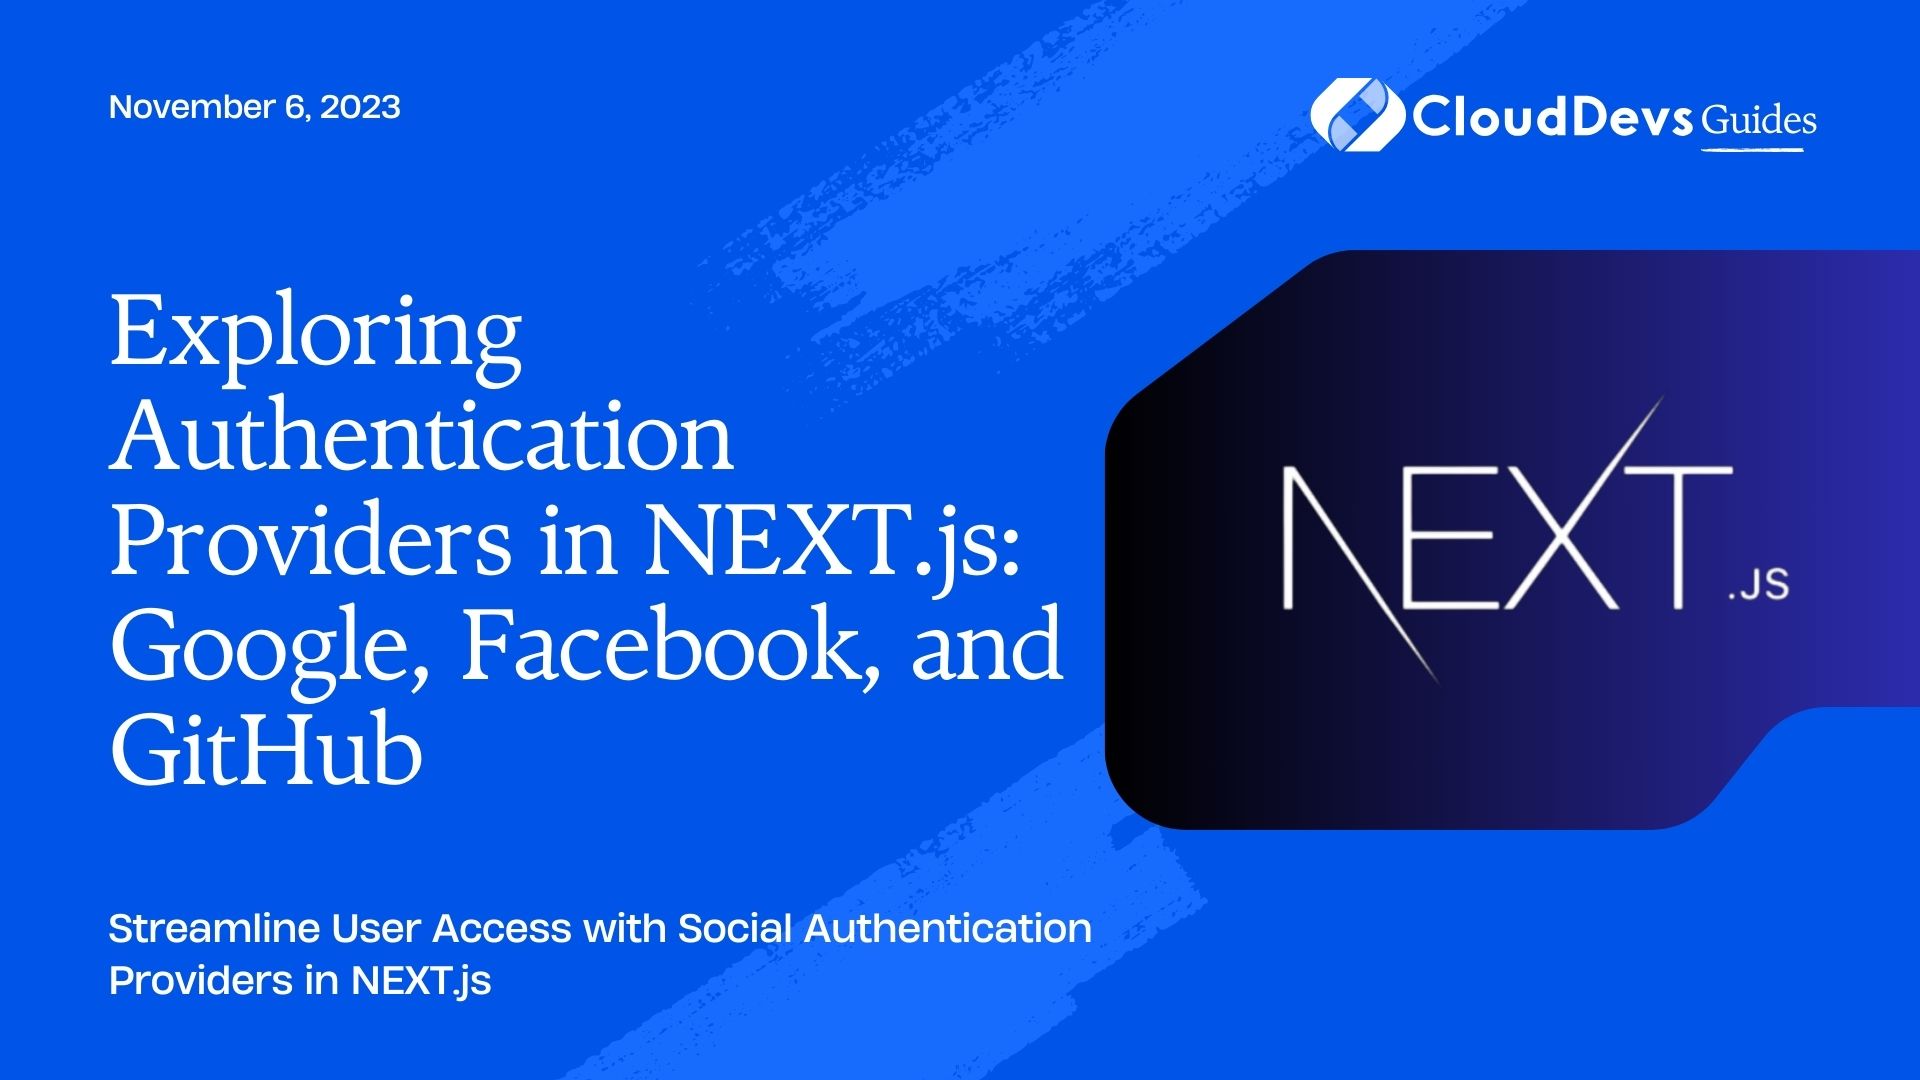 Exploring Authentication Providers in NEXT.js: Google, Facebook, and GitHub